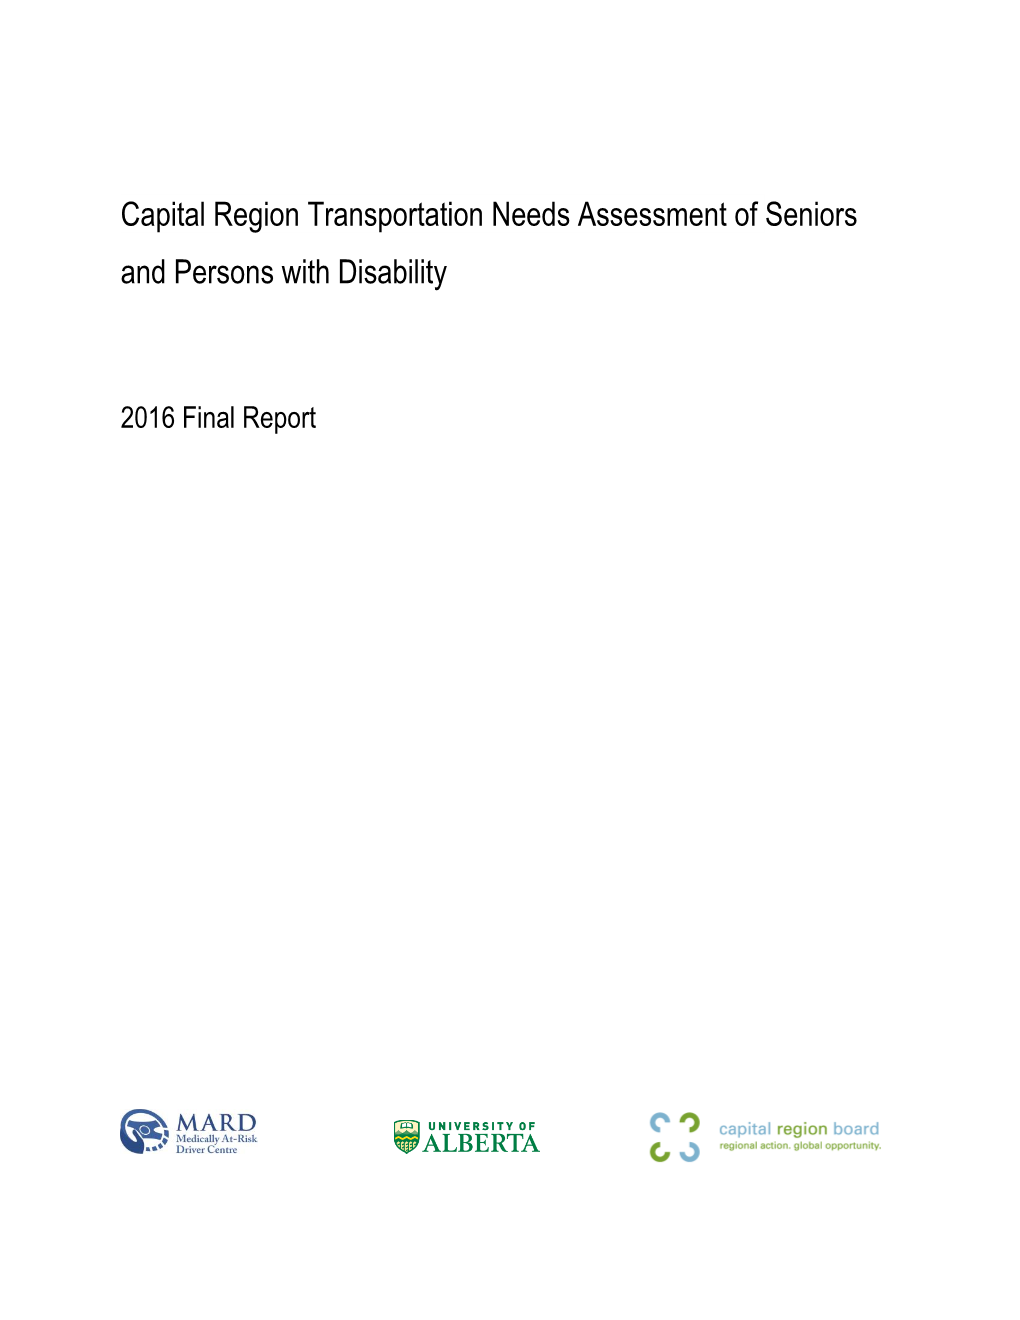 Capital Region Board Transportation Needs Assessment of Seniors and Persons with Disability